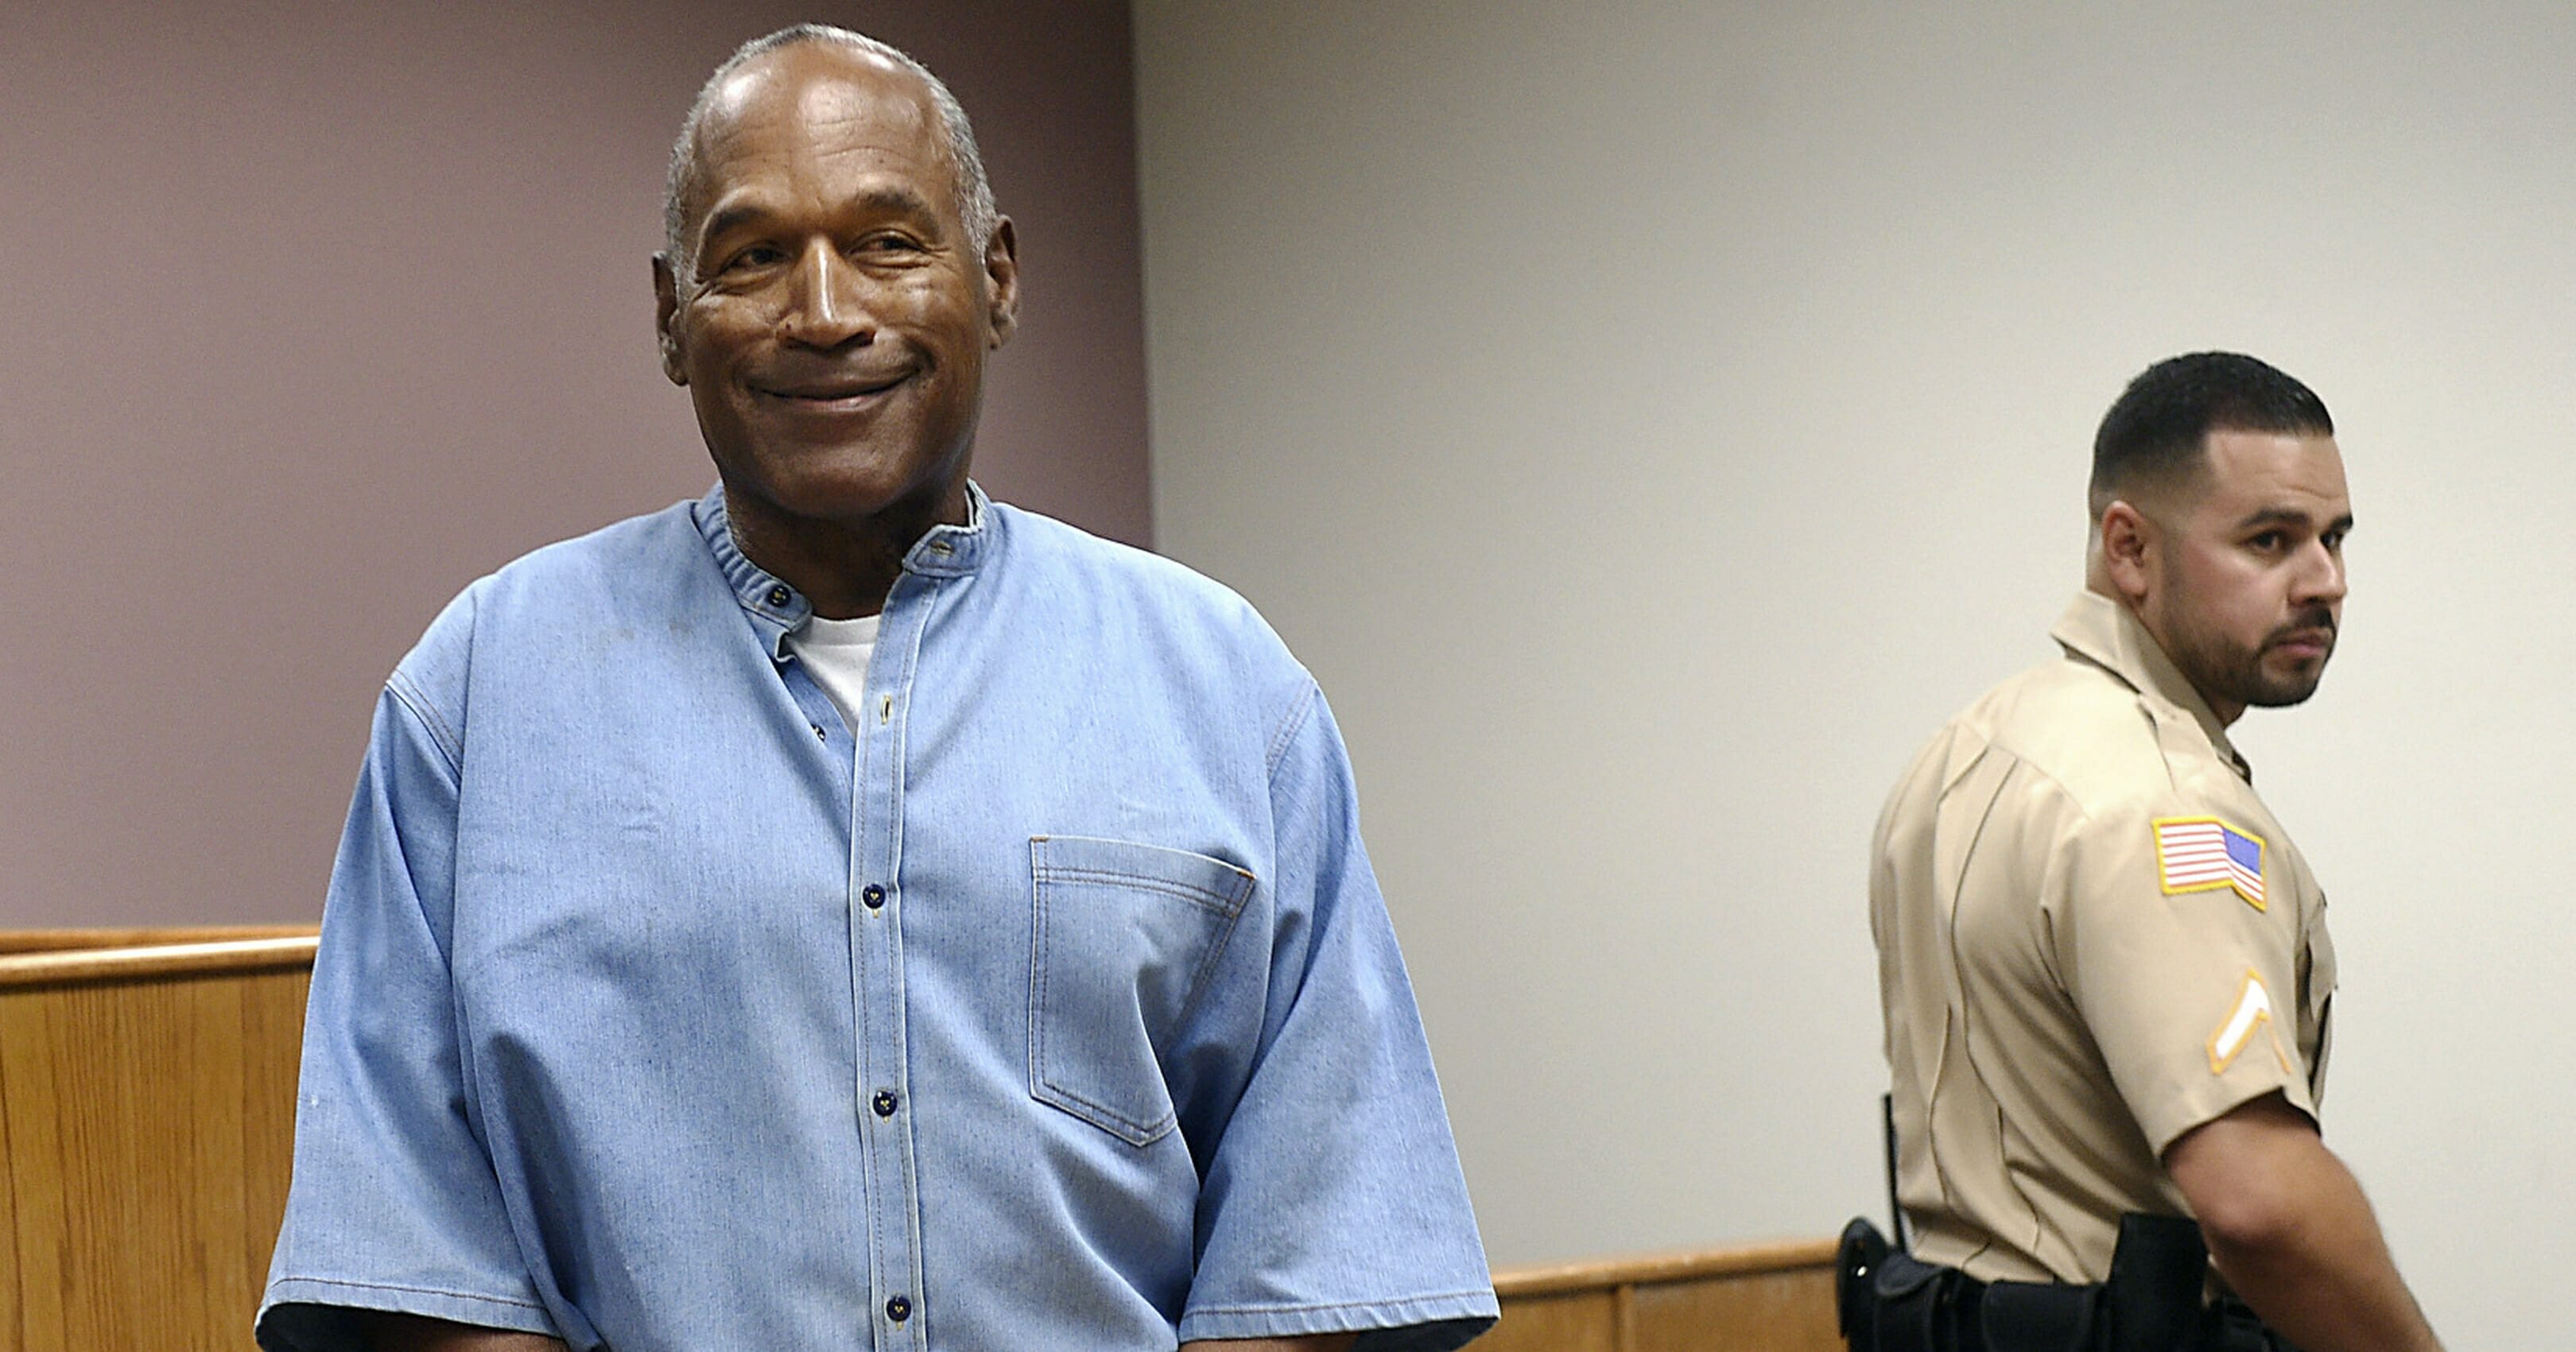 In this July 20, 2017, file photo, former NFL football star O.J. Simpson enters his parole hearing at the Lovelock Correctional Center in Lovelock, Nevada. Simpson is suing a Las Vegas hotel-casino, alleging unnamed employees defamed him by telling celebrity news site TMZ he was ordered off the property in 2017 for being drunk, disruptive and unruly.